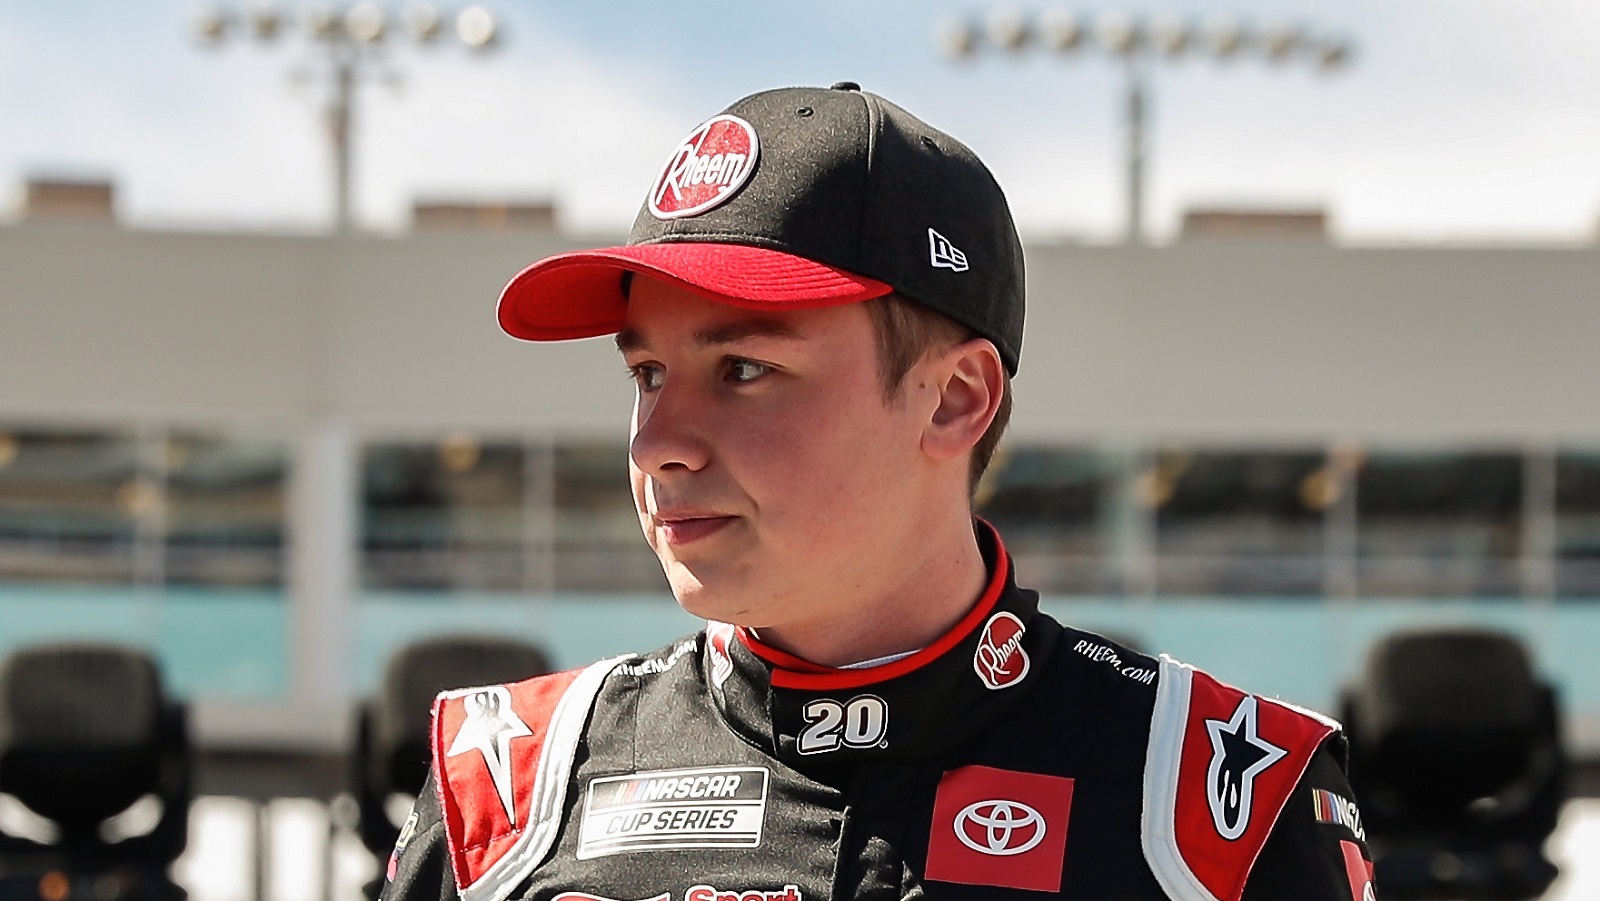 Christopher Bell, driver of the No. 20 Joe Gibbs Racing Toyota, looks on before the NASCAR Cup Series Ruoff Mortgage 500 on March 13, 2022 at Phoenix Raceway.